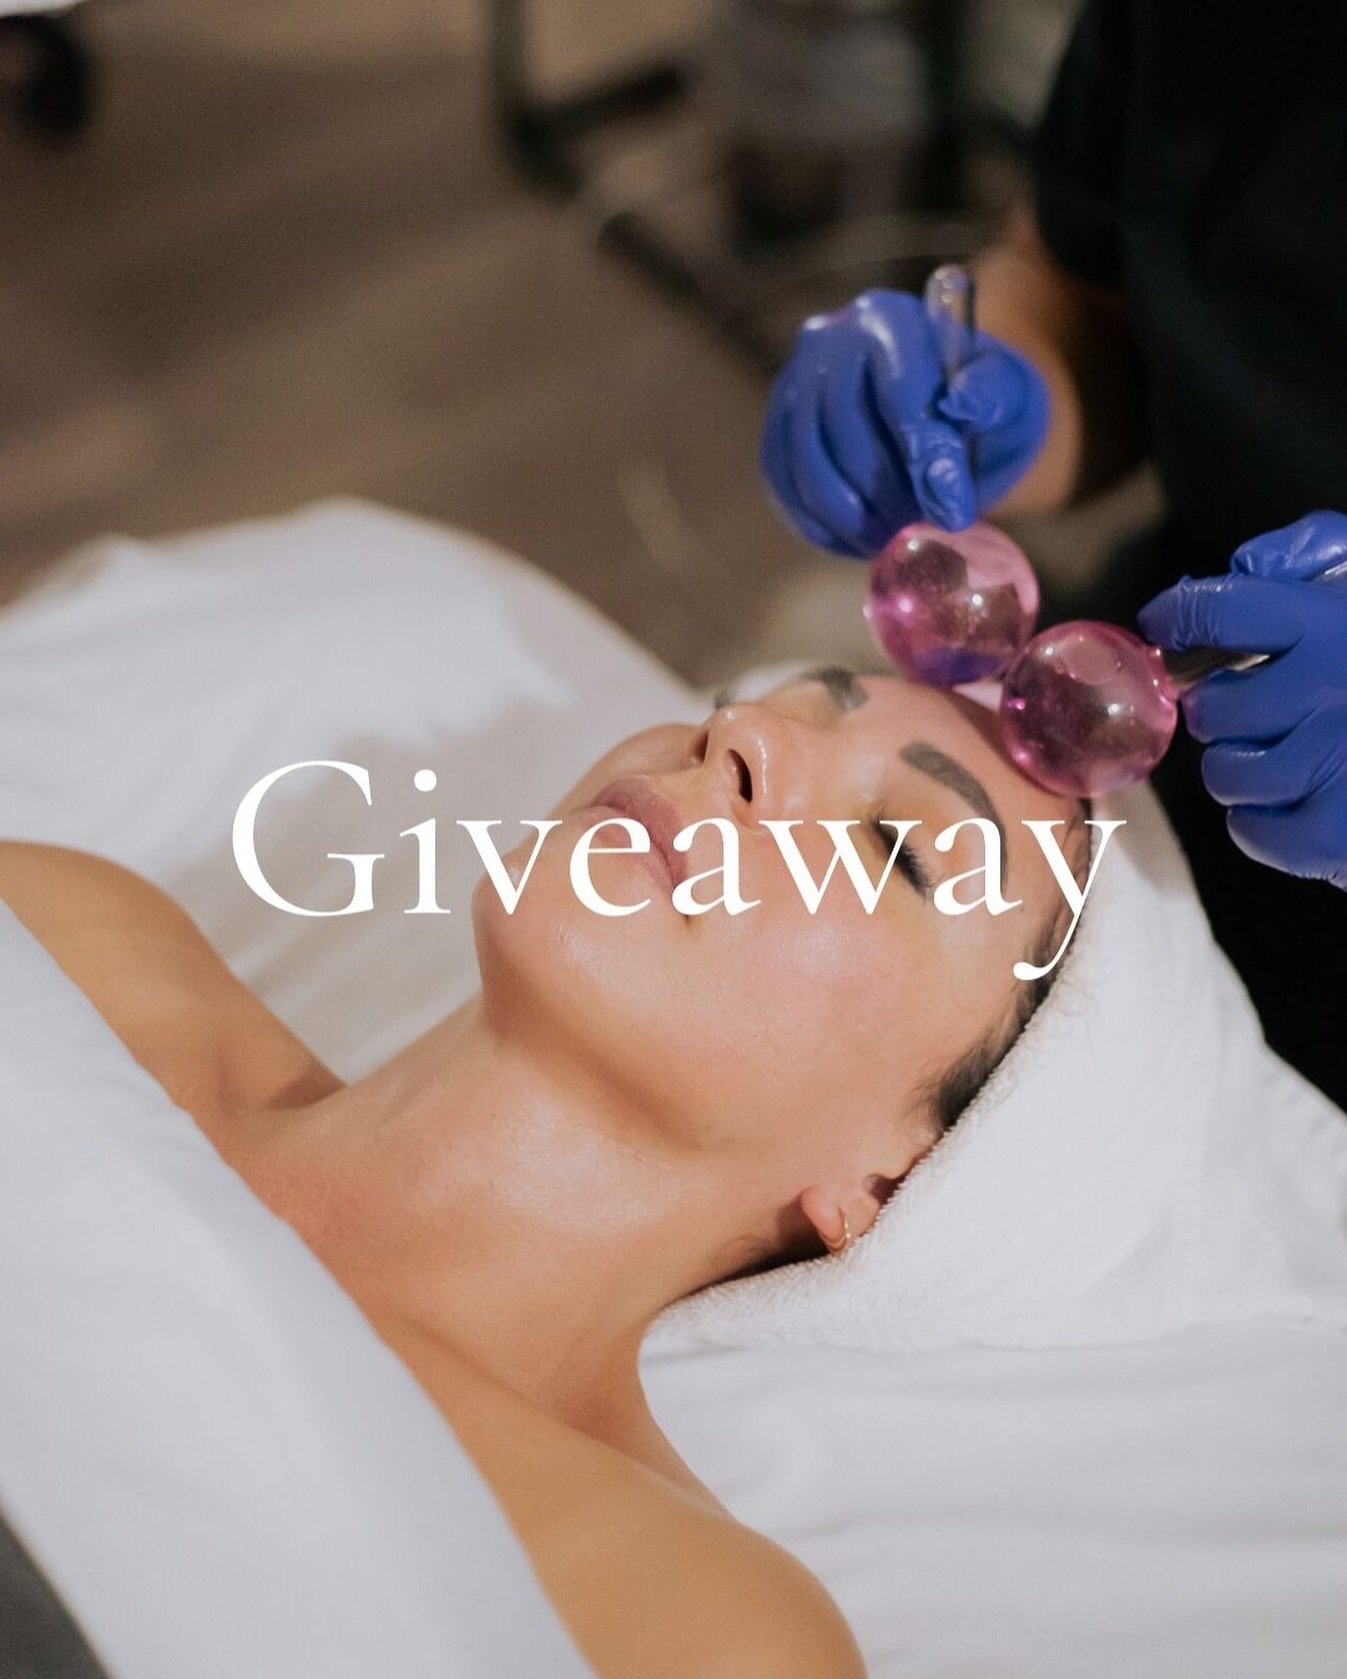 MAY GIVEAWAY: We are giving one lucky winner our Revitalize Spa Package (50 minute signature Massage + Designer Facial of your choice) 

How to enter:
&bull; Like this post + follow us @premierdayspa_utah
&bull; Tag a friend who also deserves a spa d